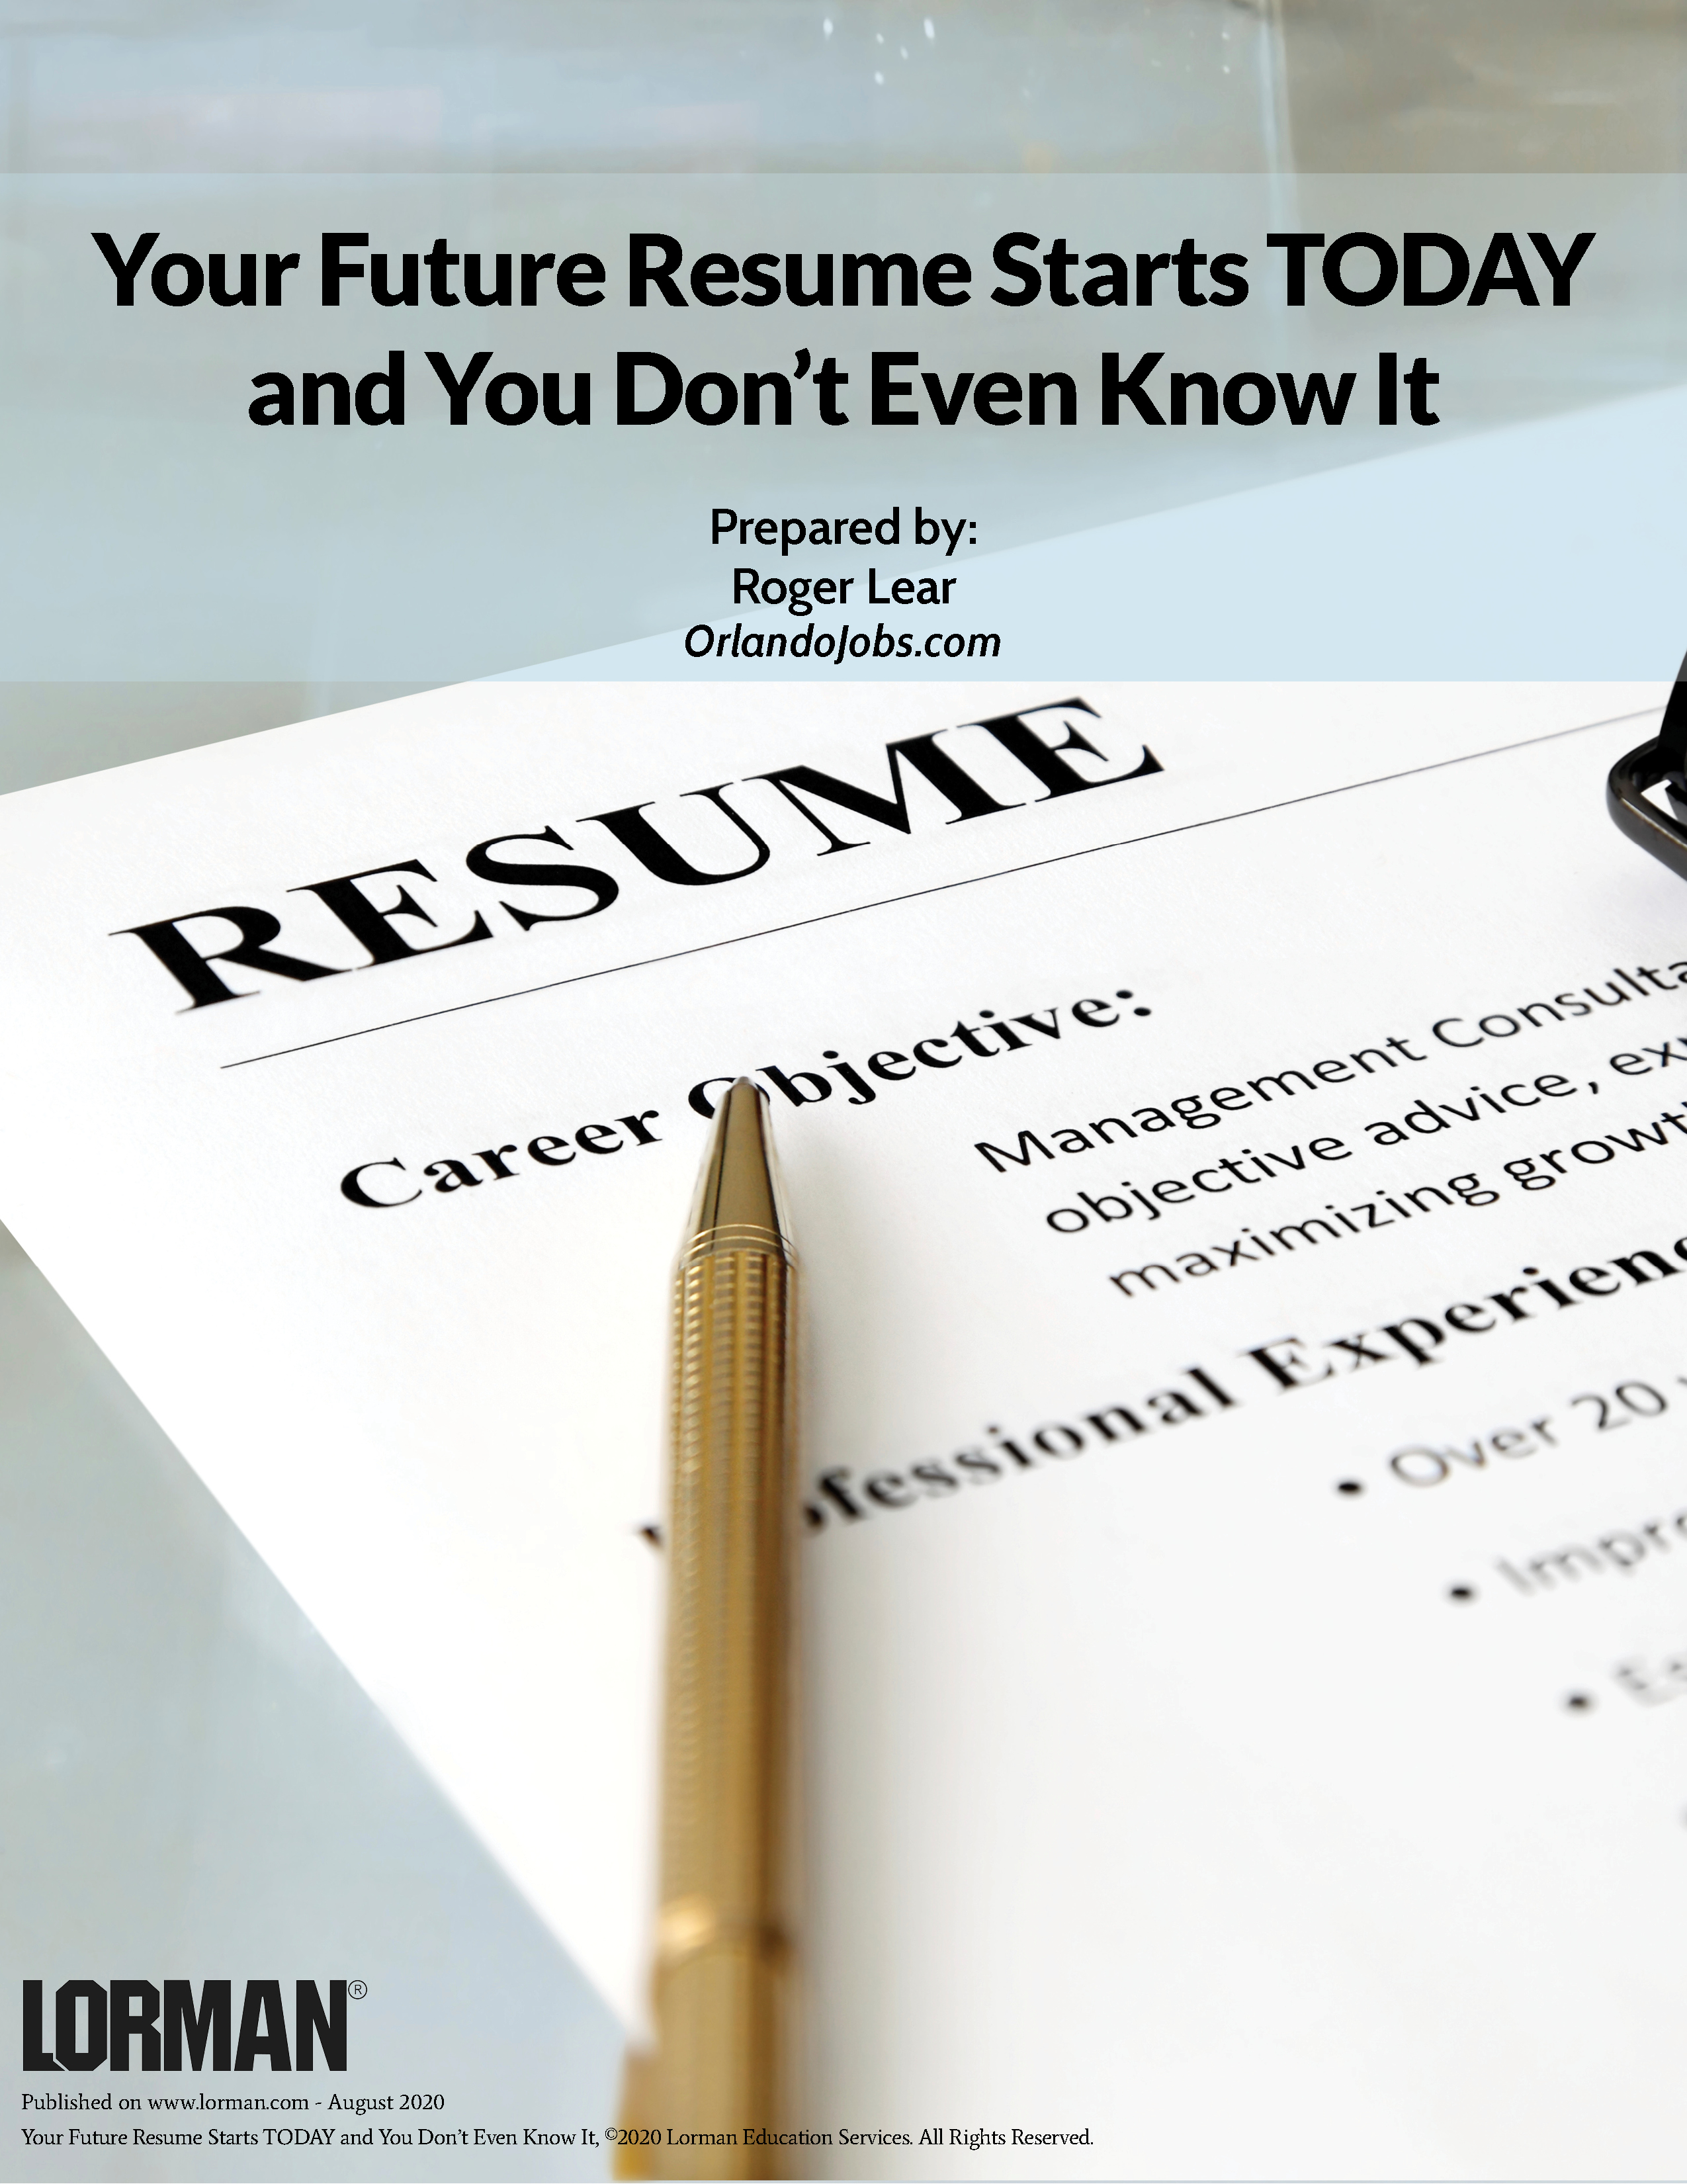 Your Future Resume Starts TODAY and You Don’t Even Know It